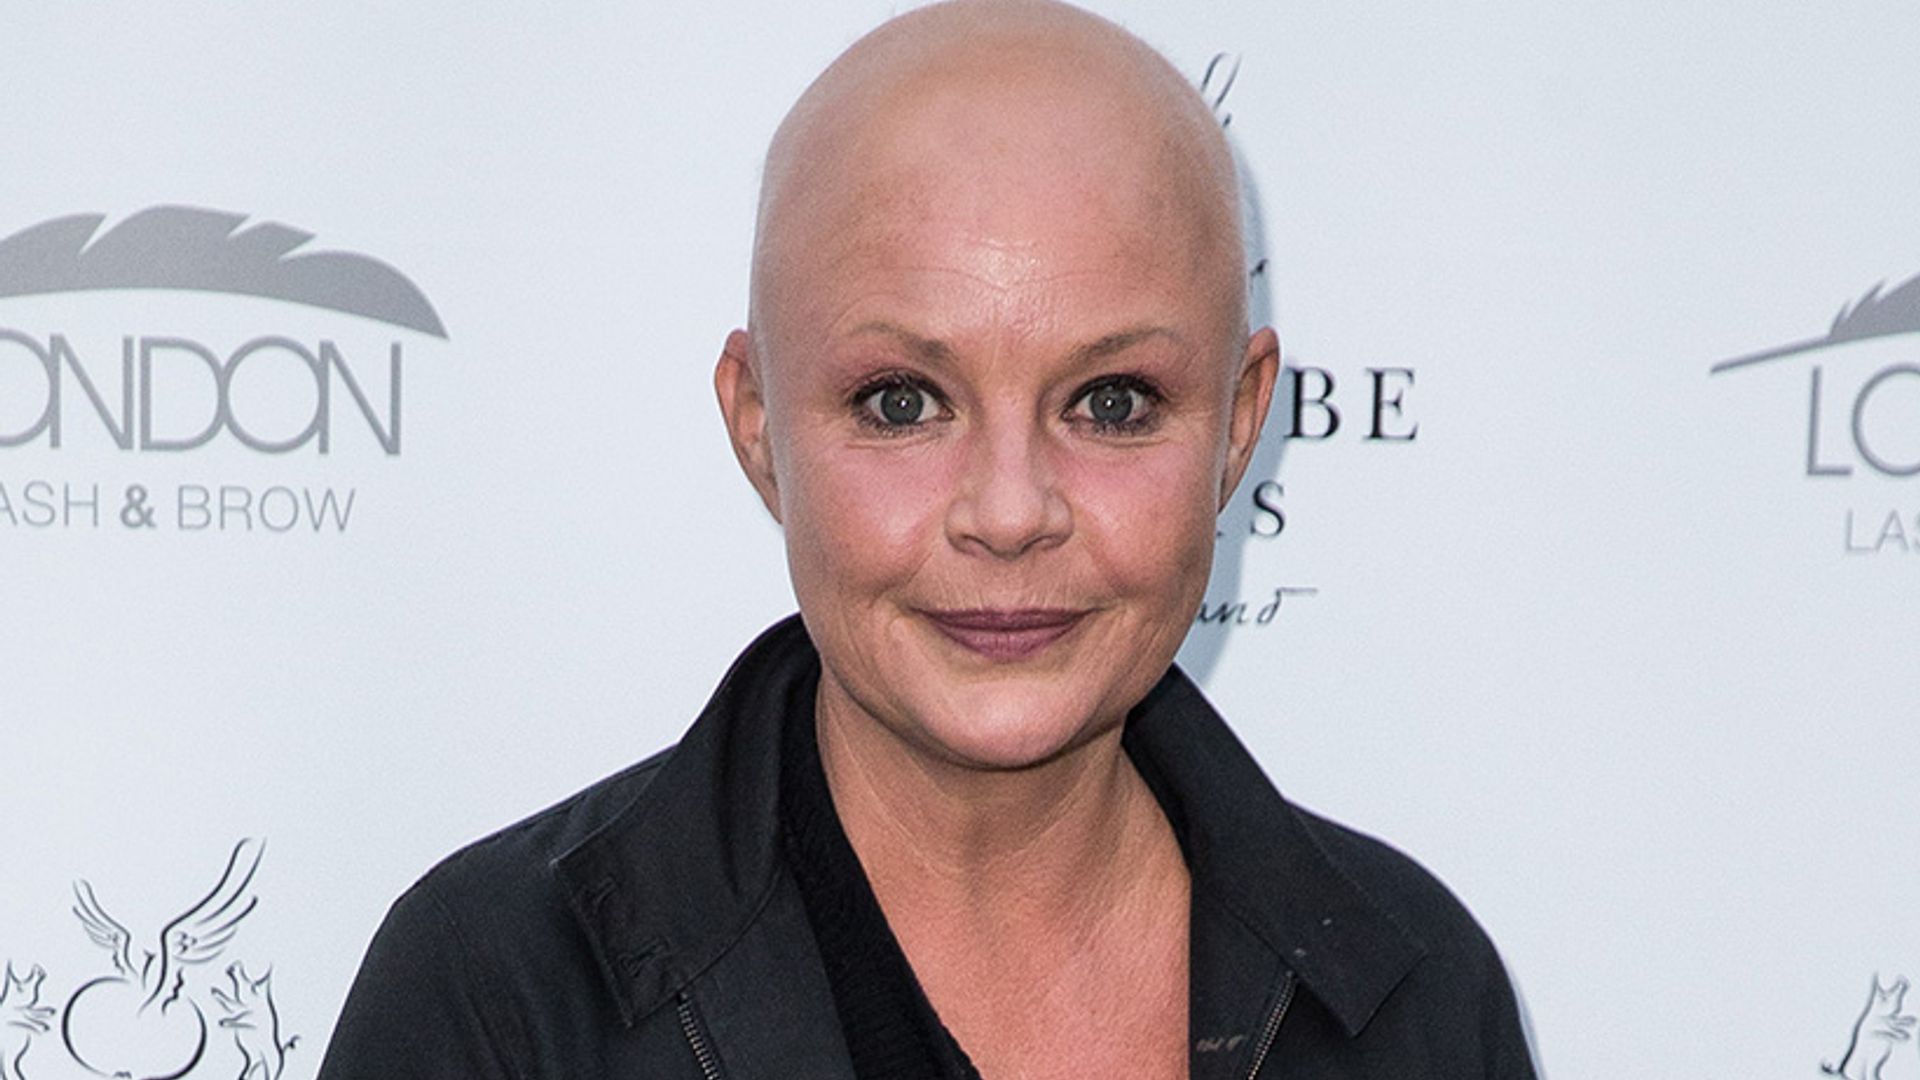 Gail Porter opens up about 'life changing' breast reduction surgery